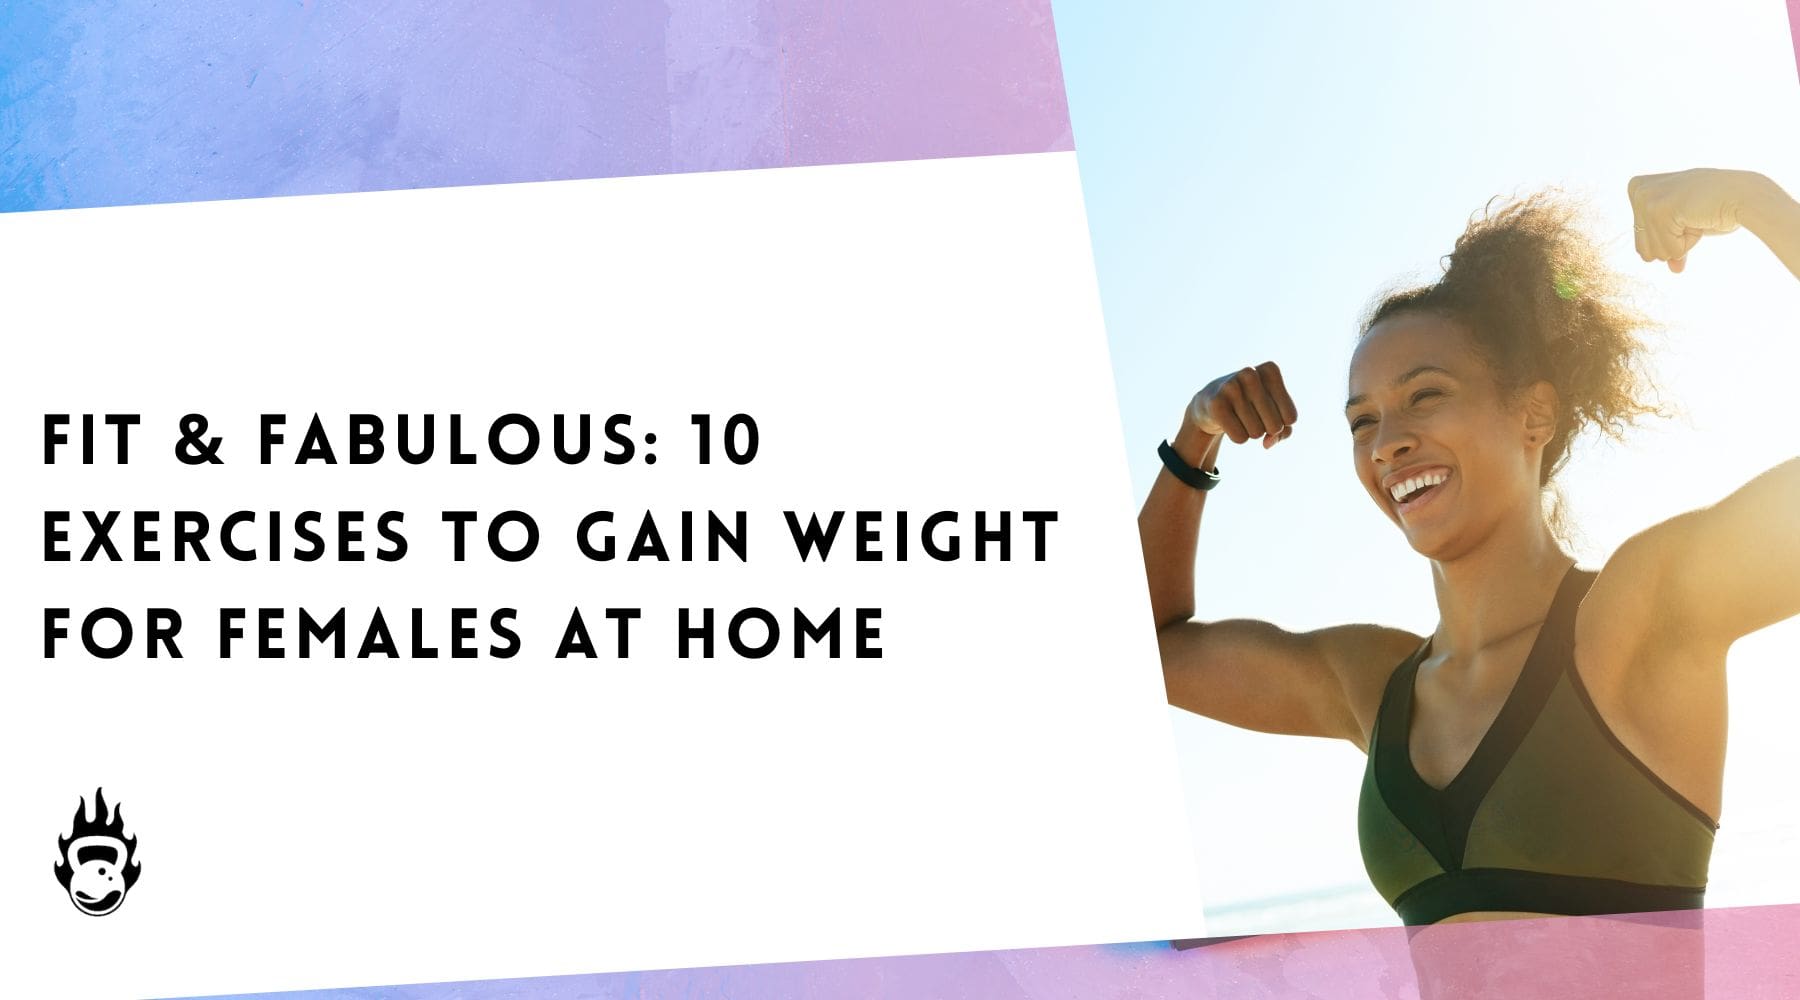 Fit & Fabulous: 10 Exercises To Gain Weight for Females At Home